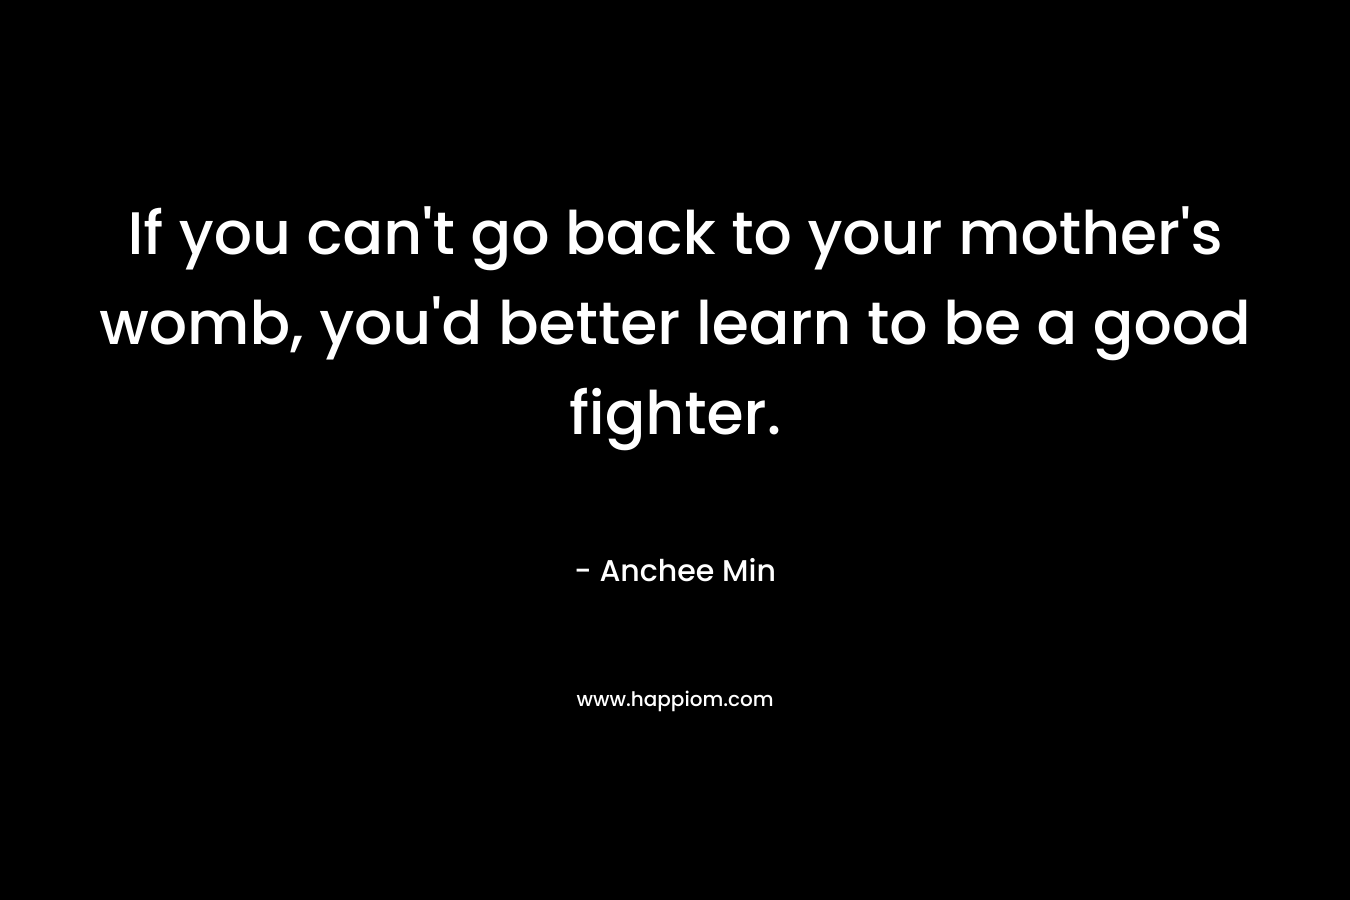 If you can't go back to your mother's womb, you'd better learn to be a good fighter.